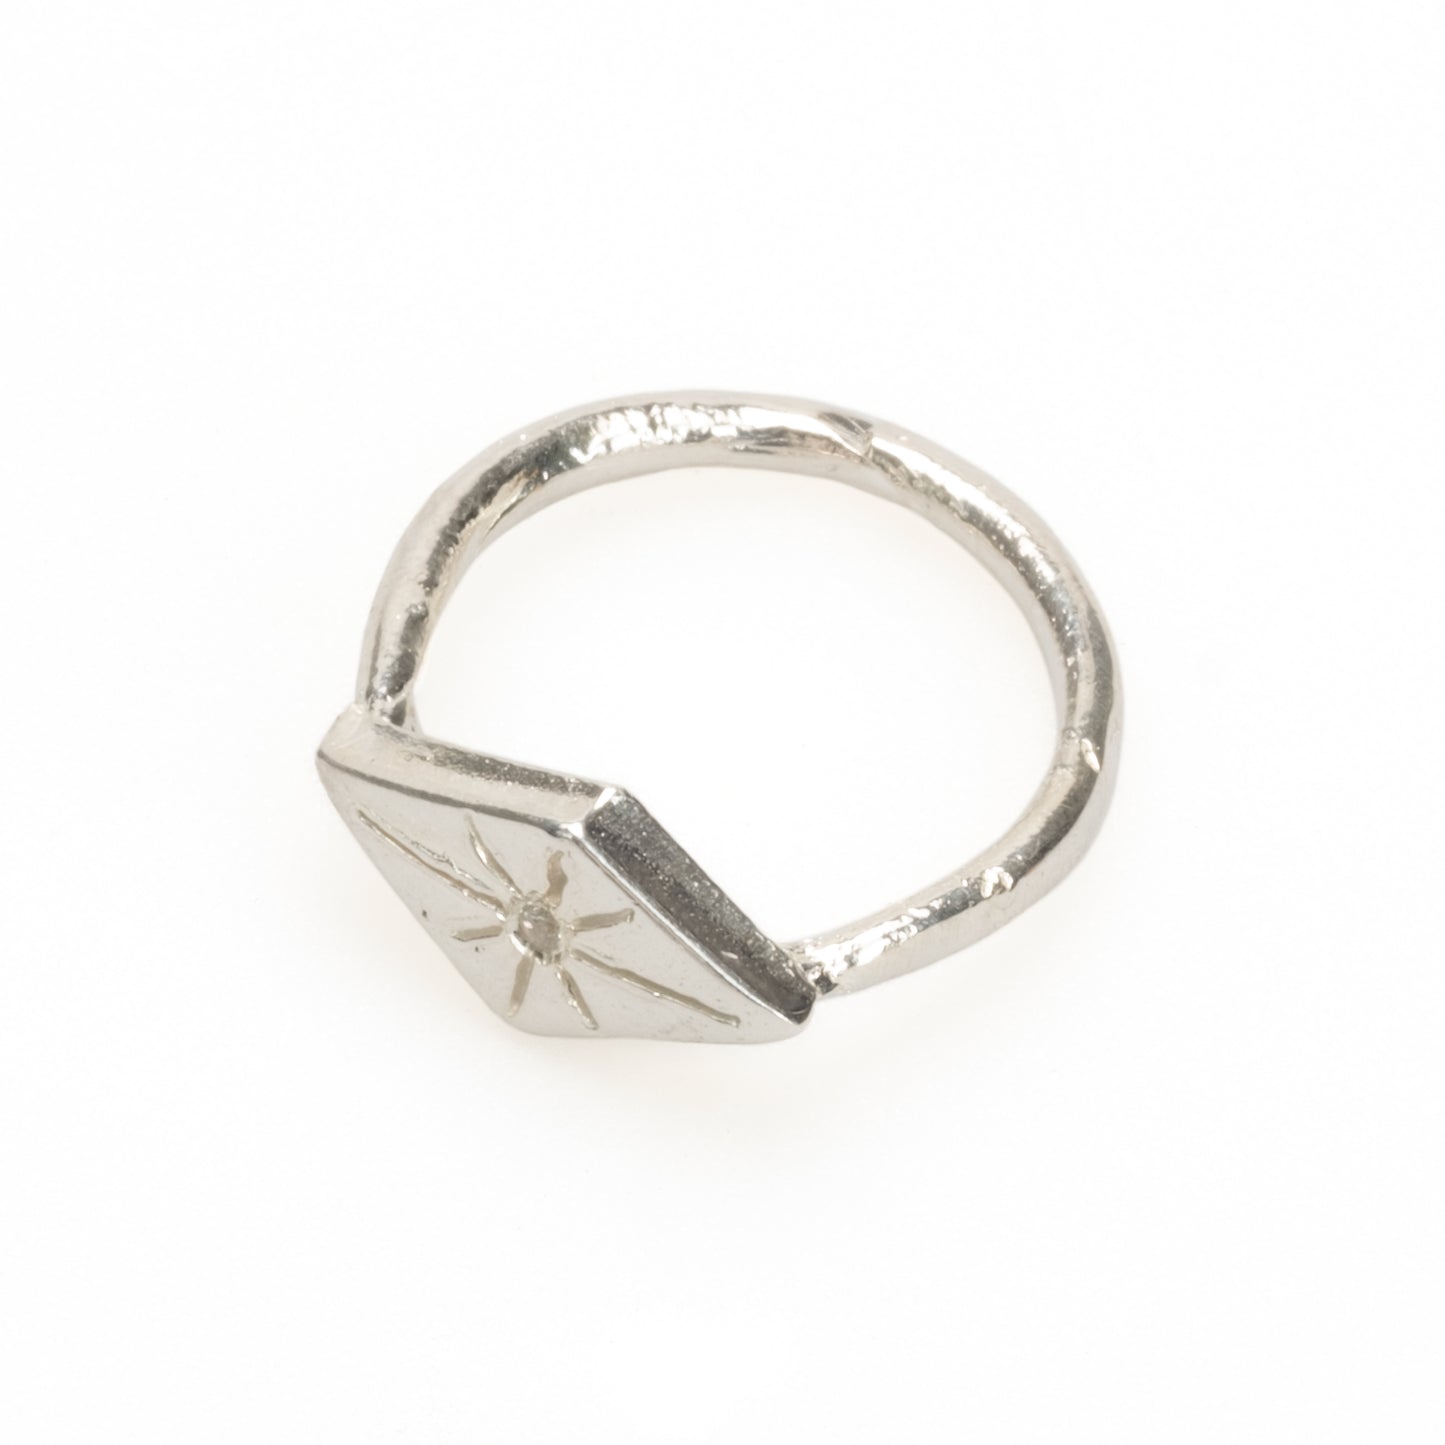 Gold or 925 Sterling Silver Adjustable North Star Ring